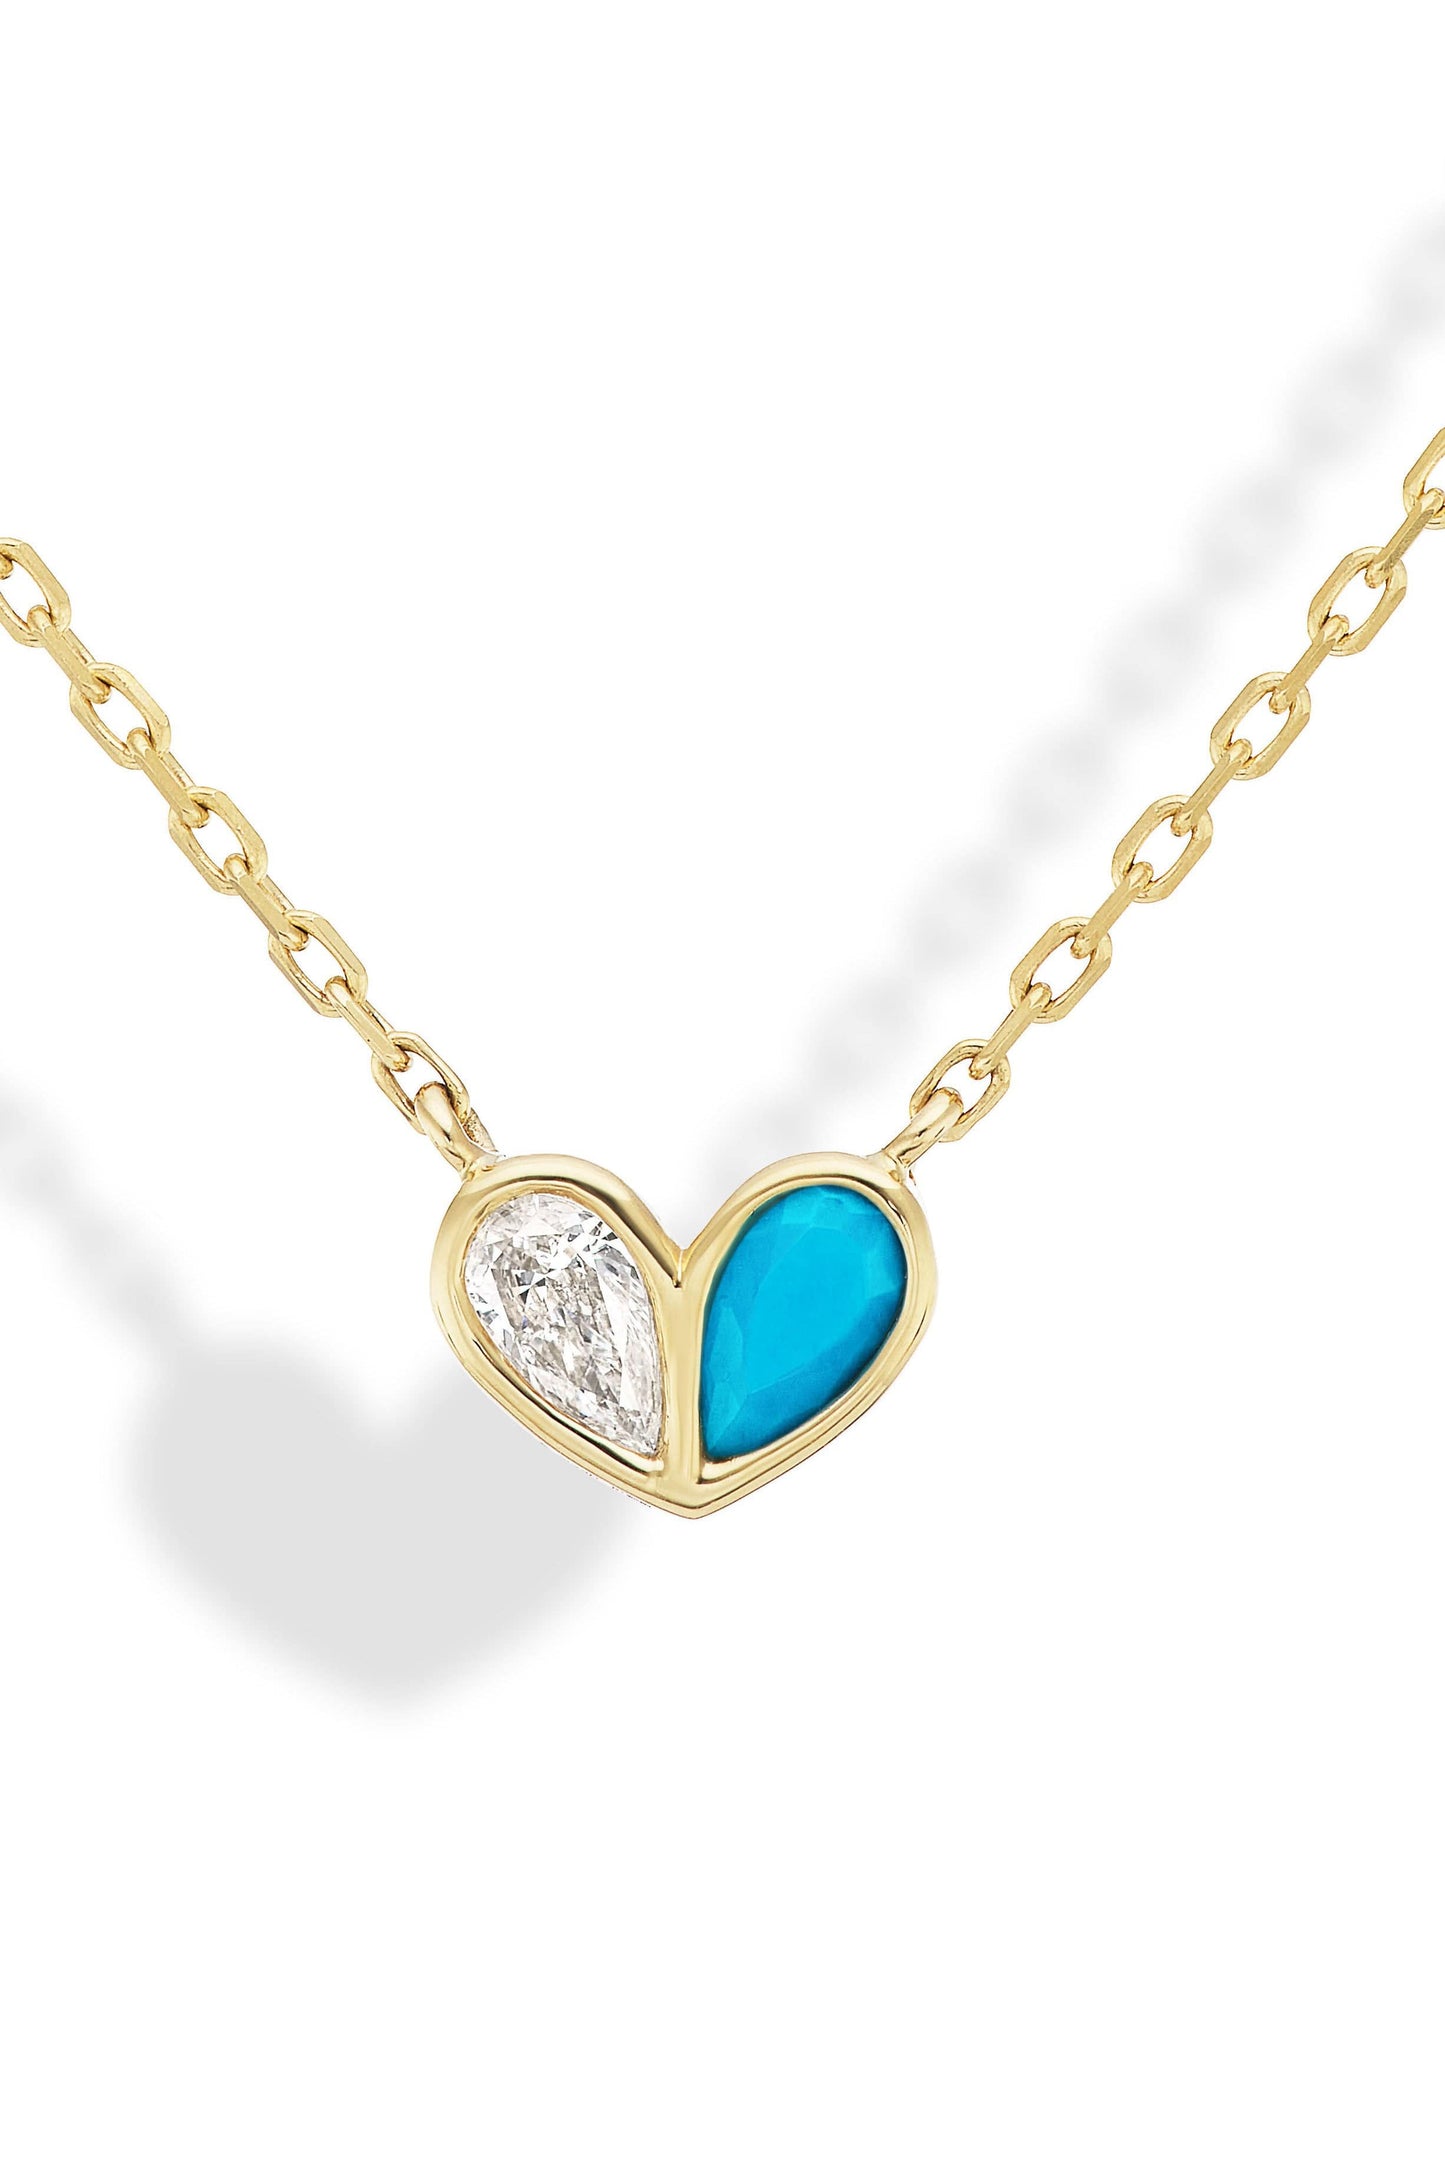 GEMELLA JEWELS-Diamond and Turquoise Sweetheart Necklace-YELLOW GOLD